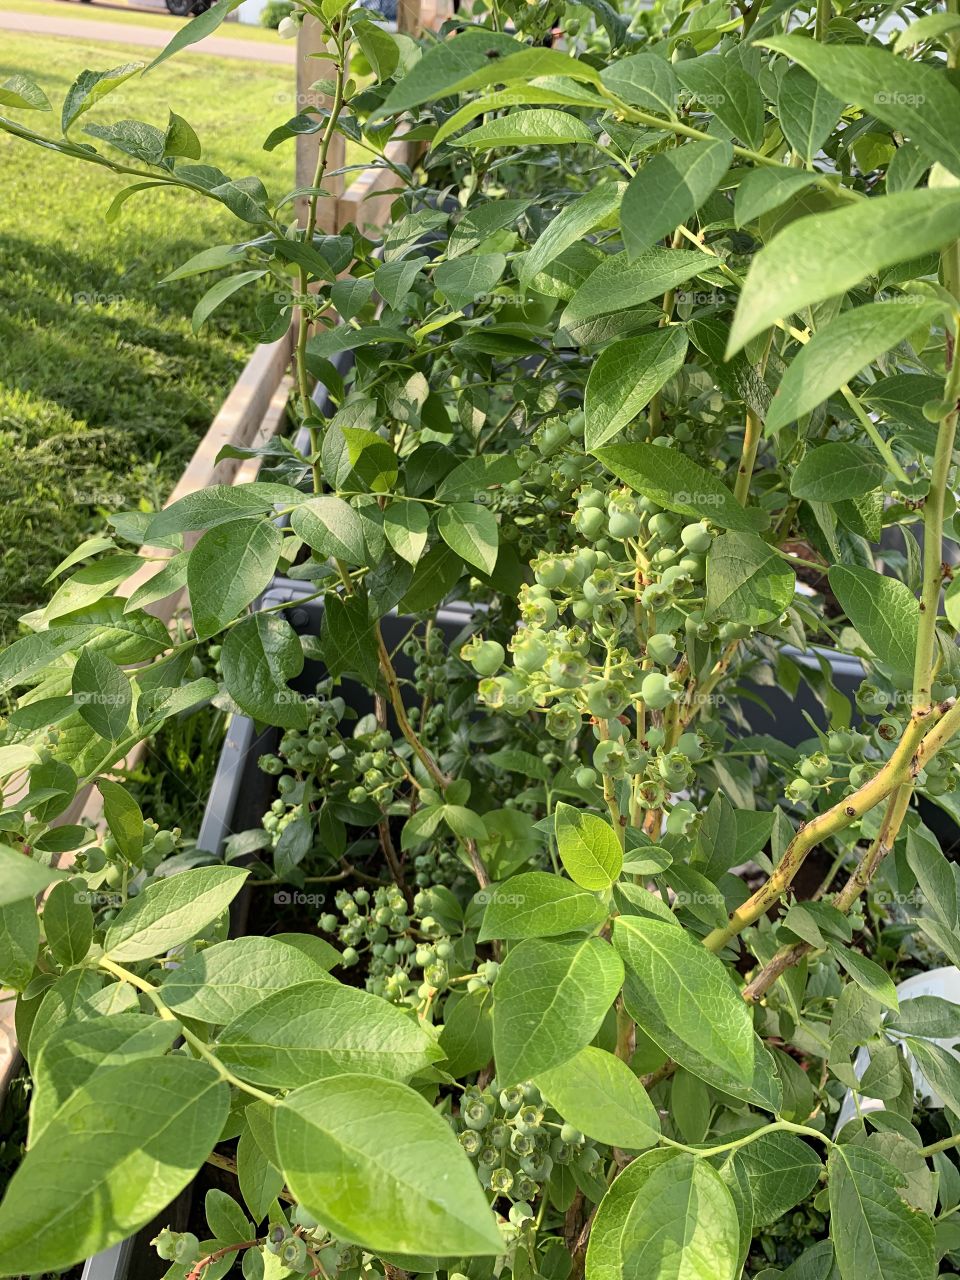 The blueberries are coming in nicely. Look at the bunches just growing in. These are going to be delicious when harvested. Do you love blueberries? 